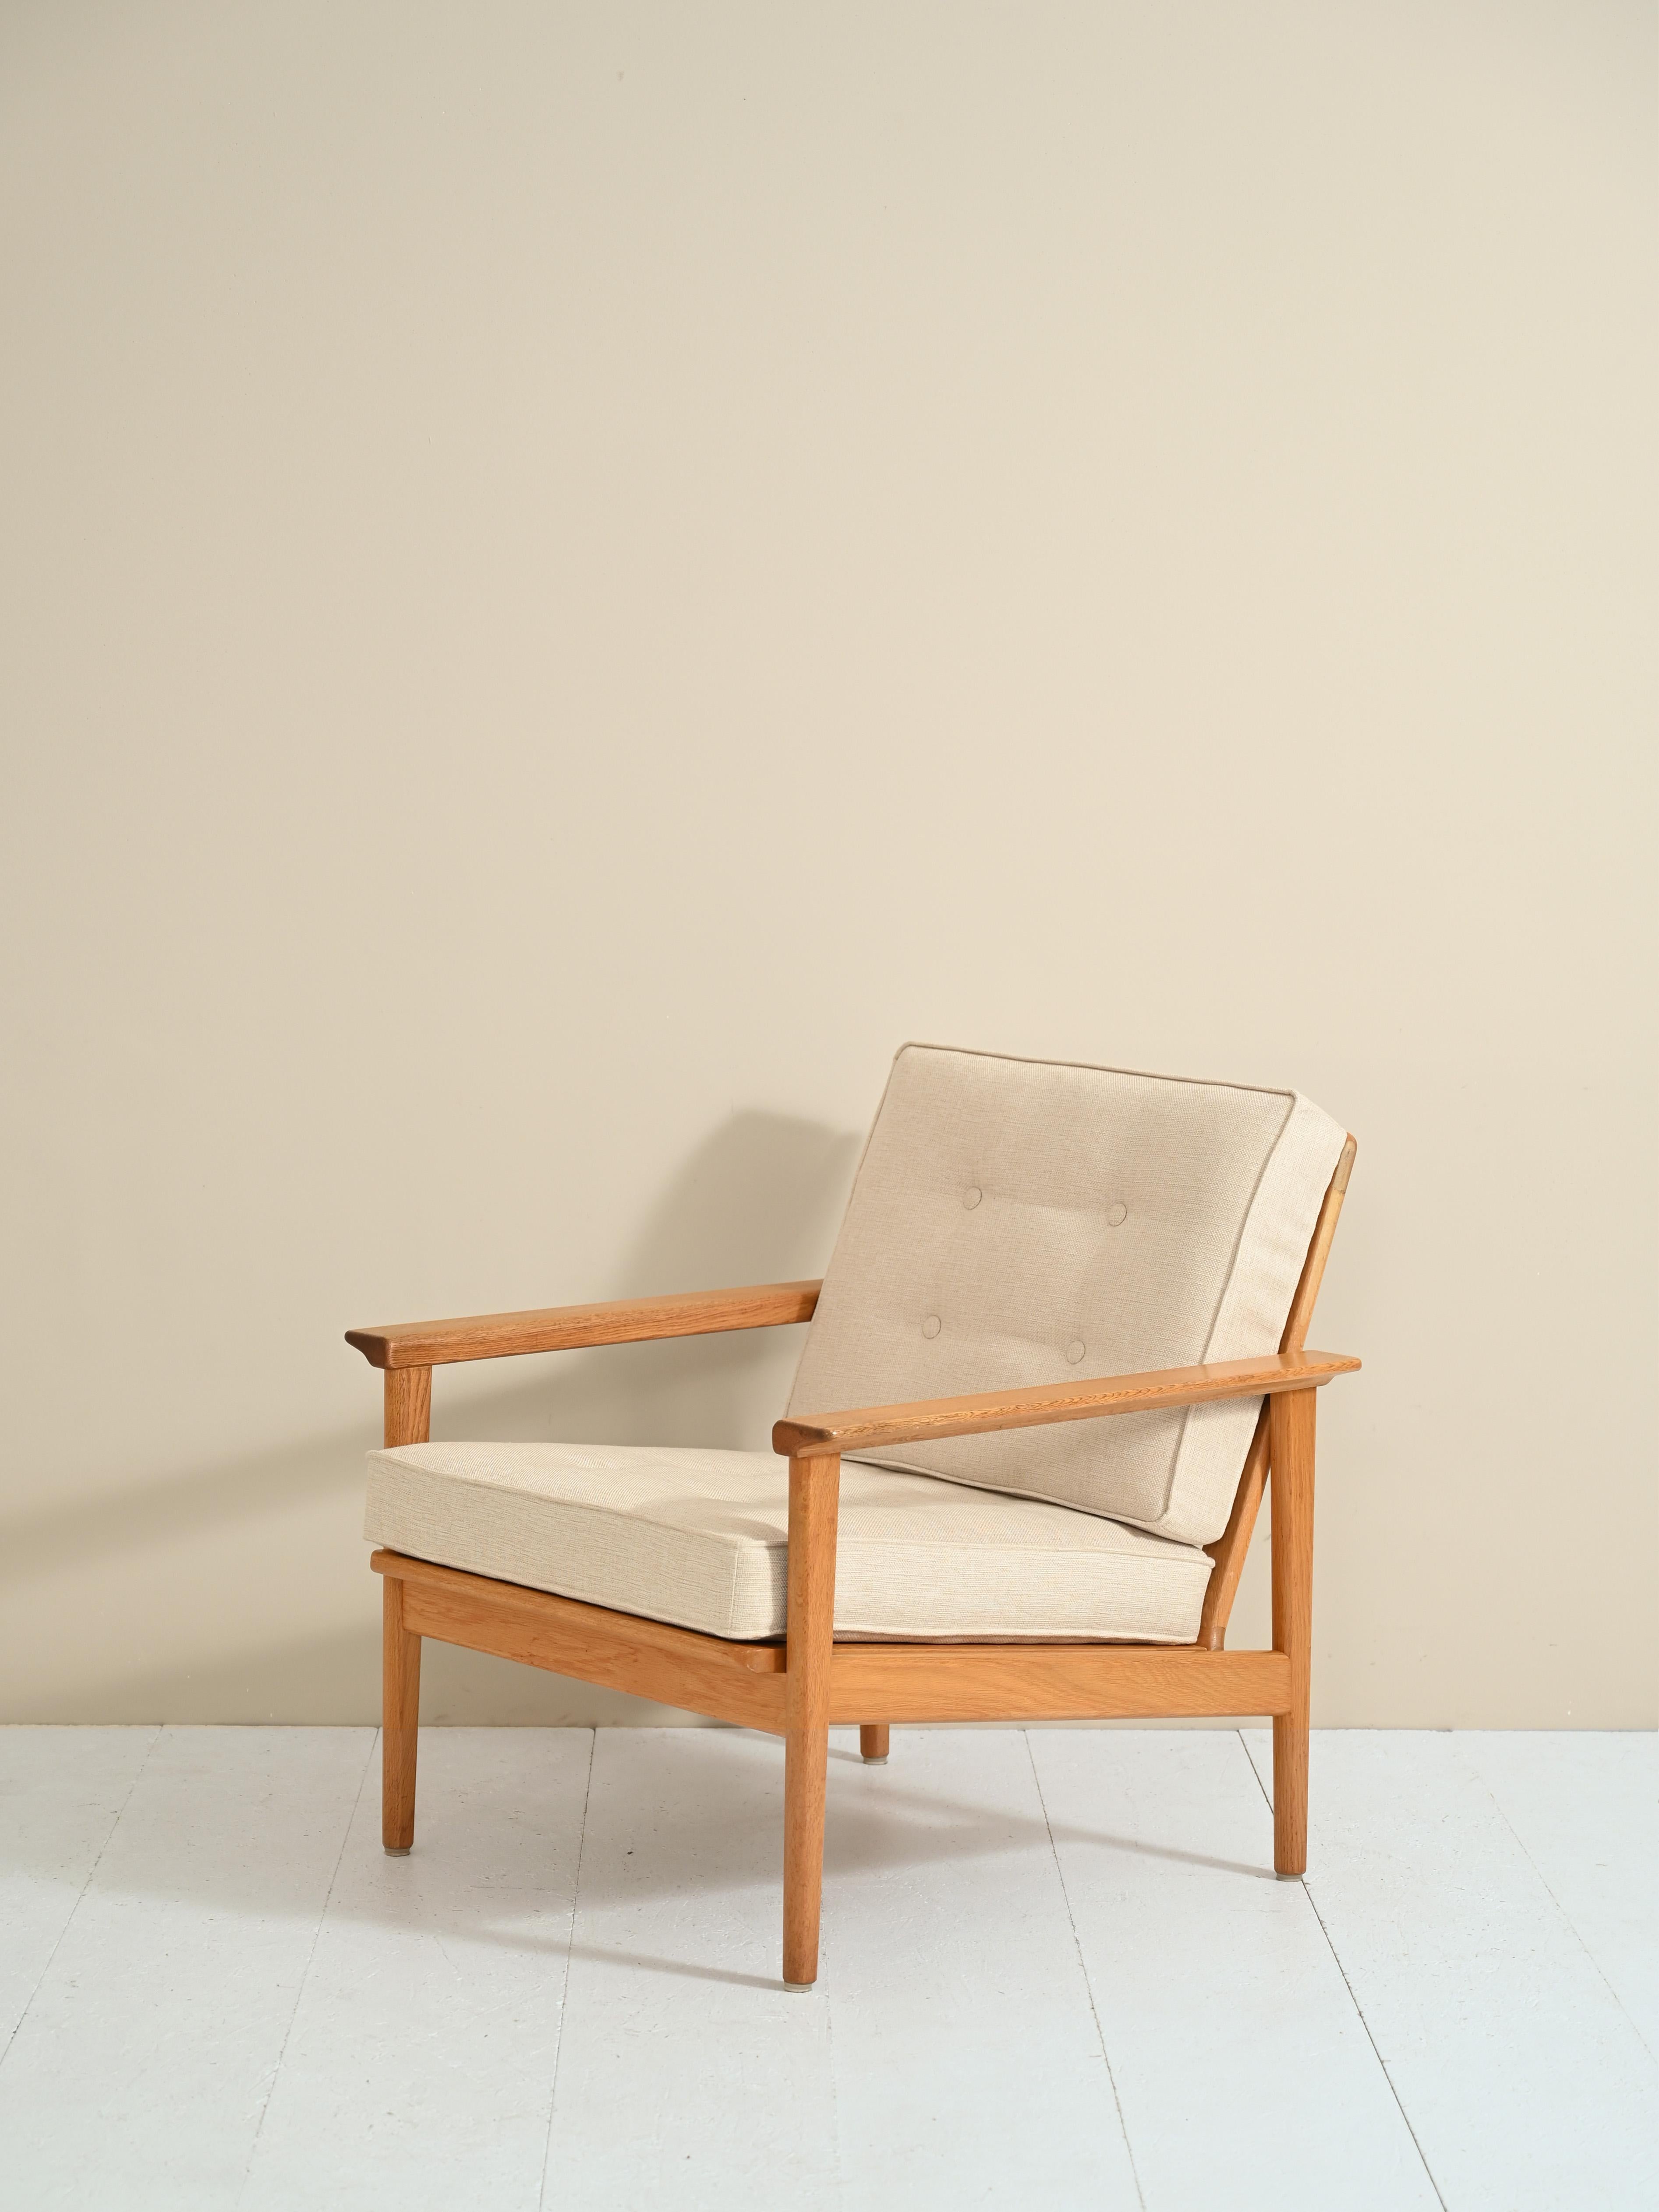 Beautiful oak armchair with original reupholstered cushions.
The frame appears solid and with a linear design. It features square legs and wide armrests with
soft edges.
The light-colored fabric makes these modern armchairs suitable for any type